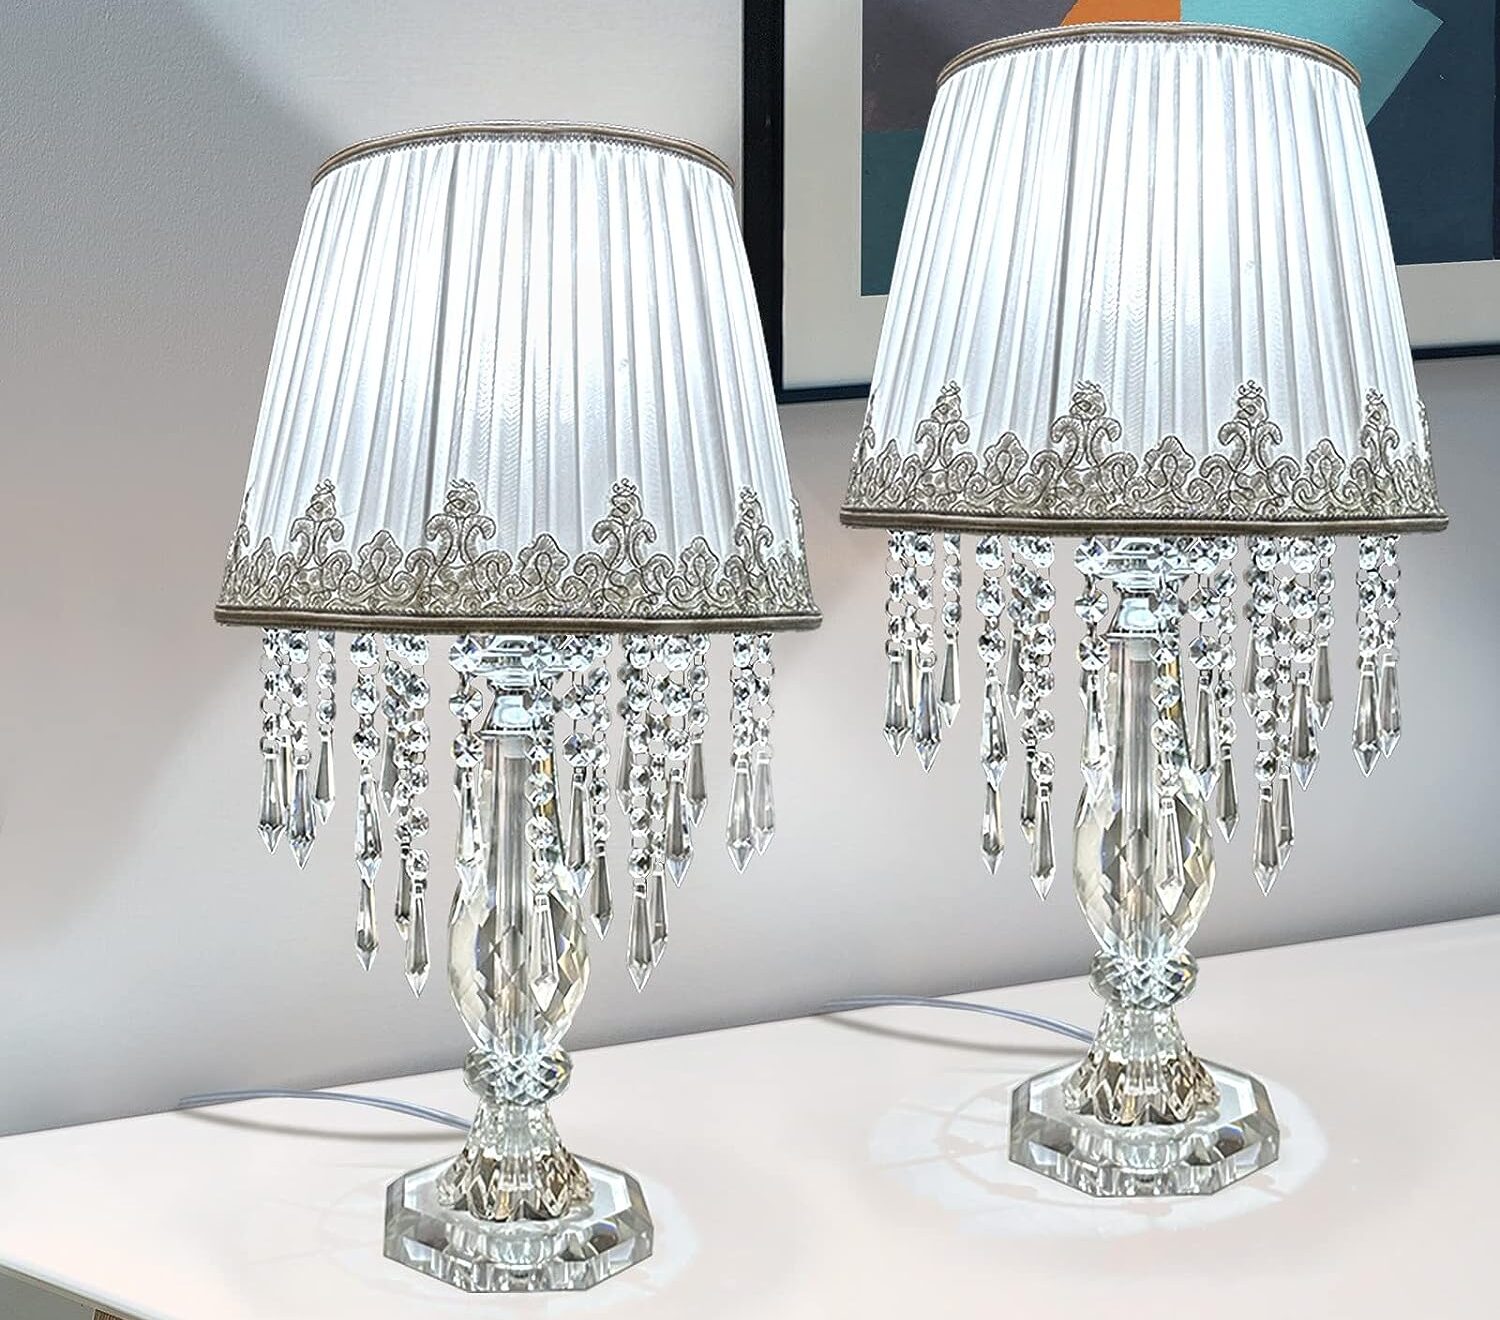 You are currently viewing Chandelier Table Lamp: Revealing Elegance